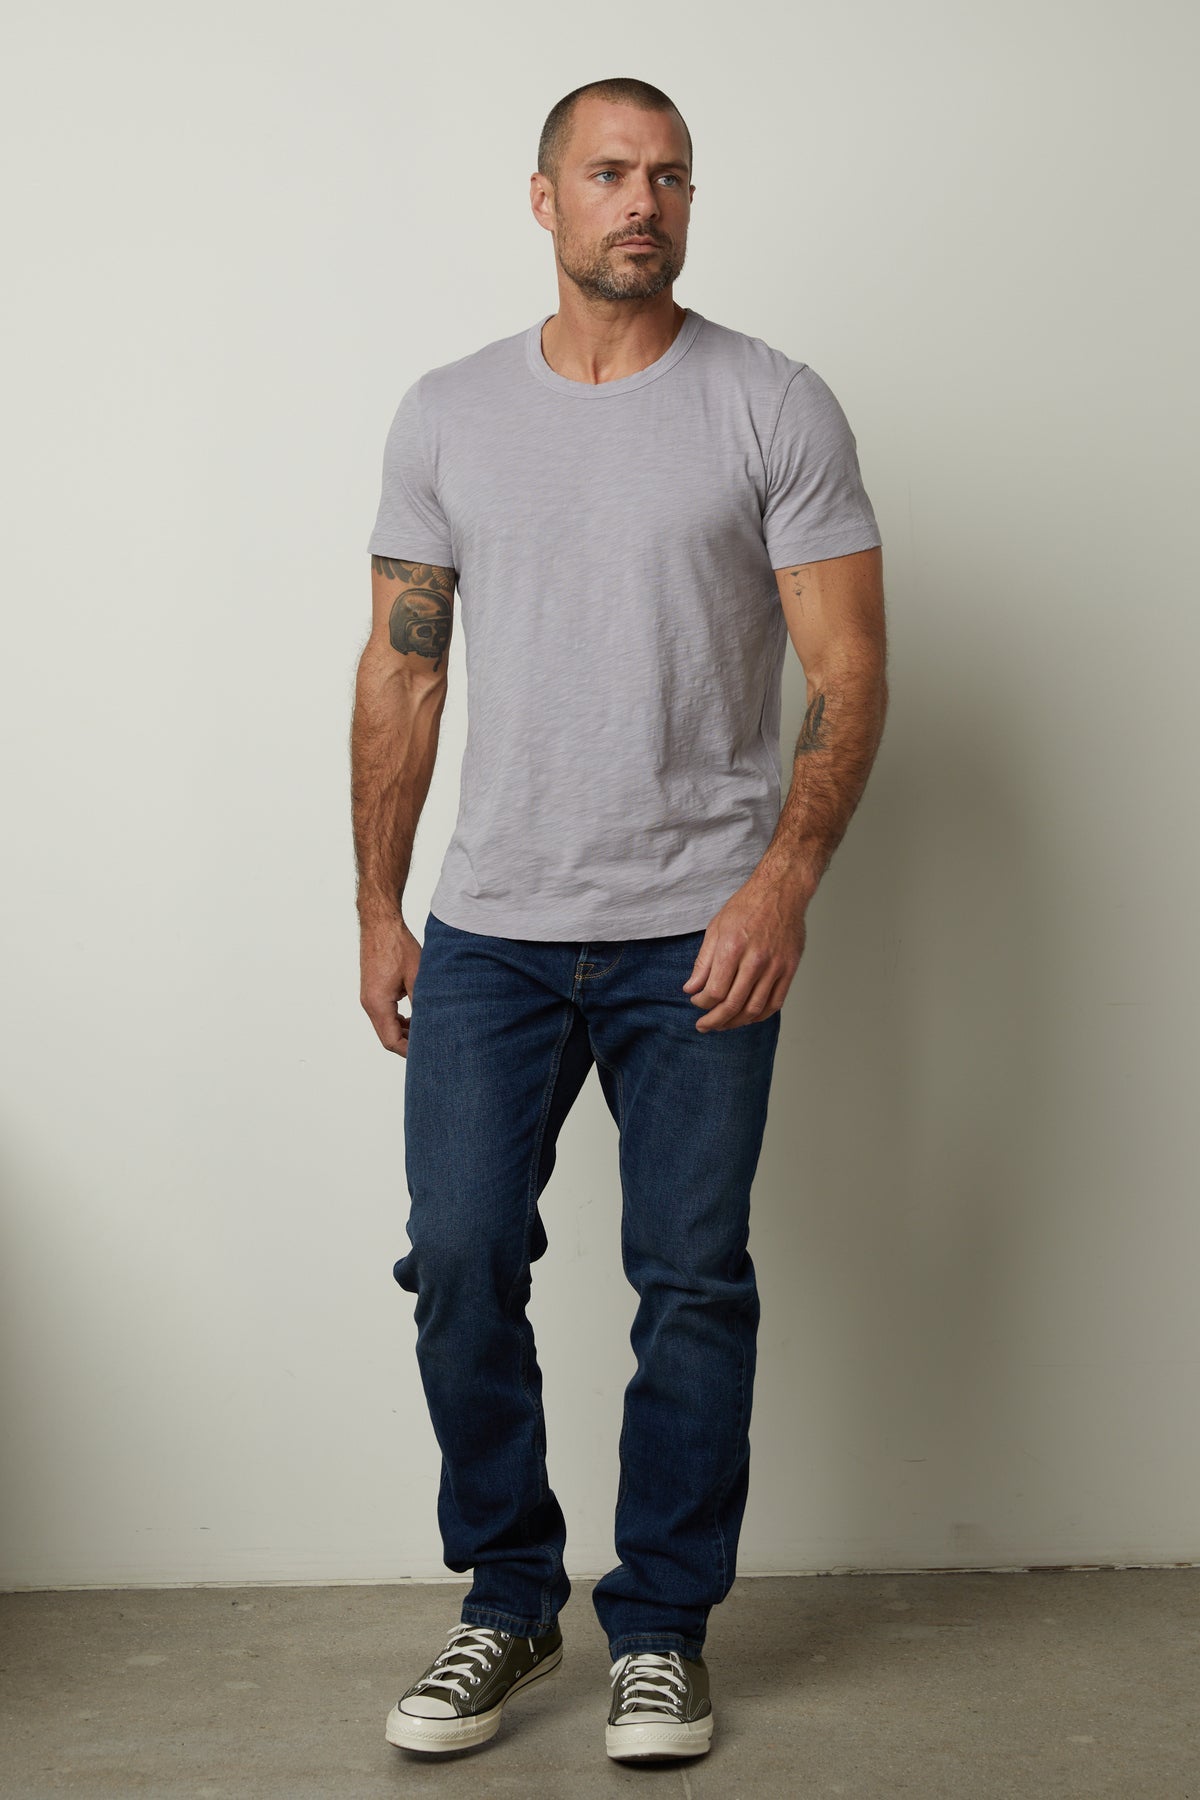   A man with short hair and tattoos on his arms stands against a plain wall, wearing a light gray, relaxed fit Velvet by Graham & Spencer AMARO TEE, blue jeans, and gray sneakers. 